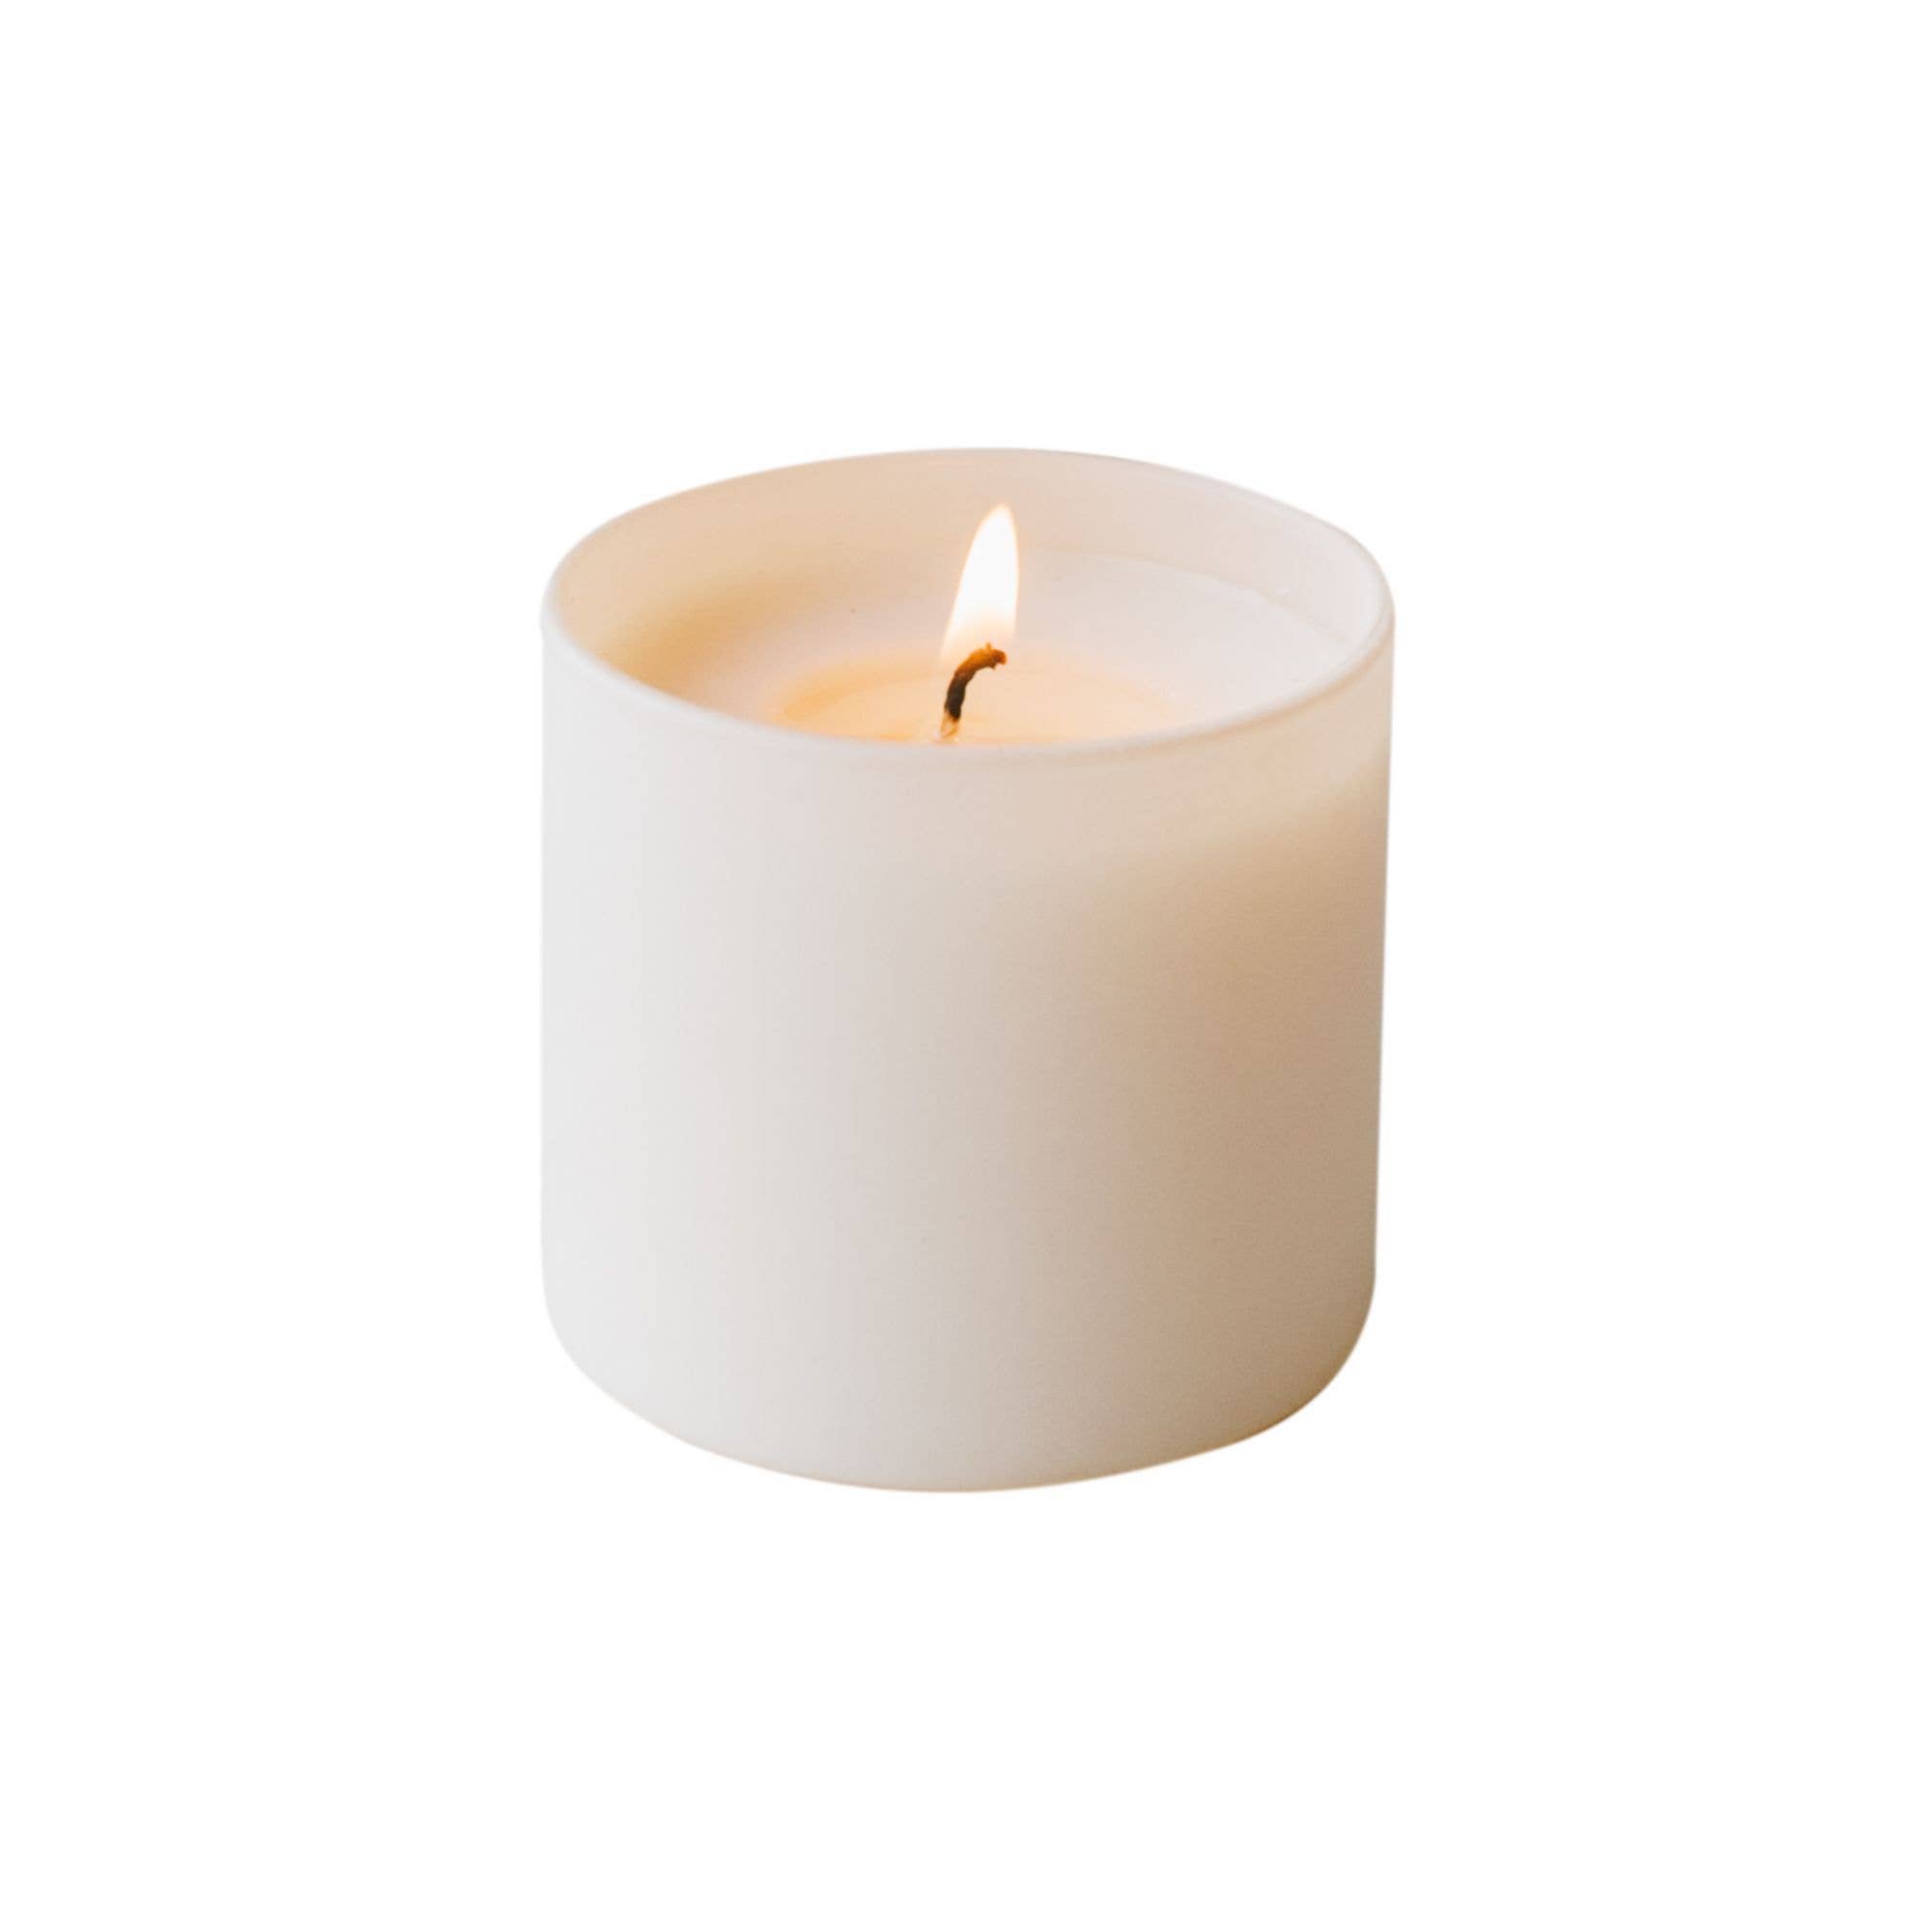 Dignity Series Soy Candles – FRENCH GIRL